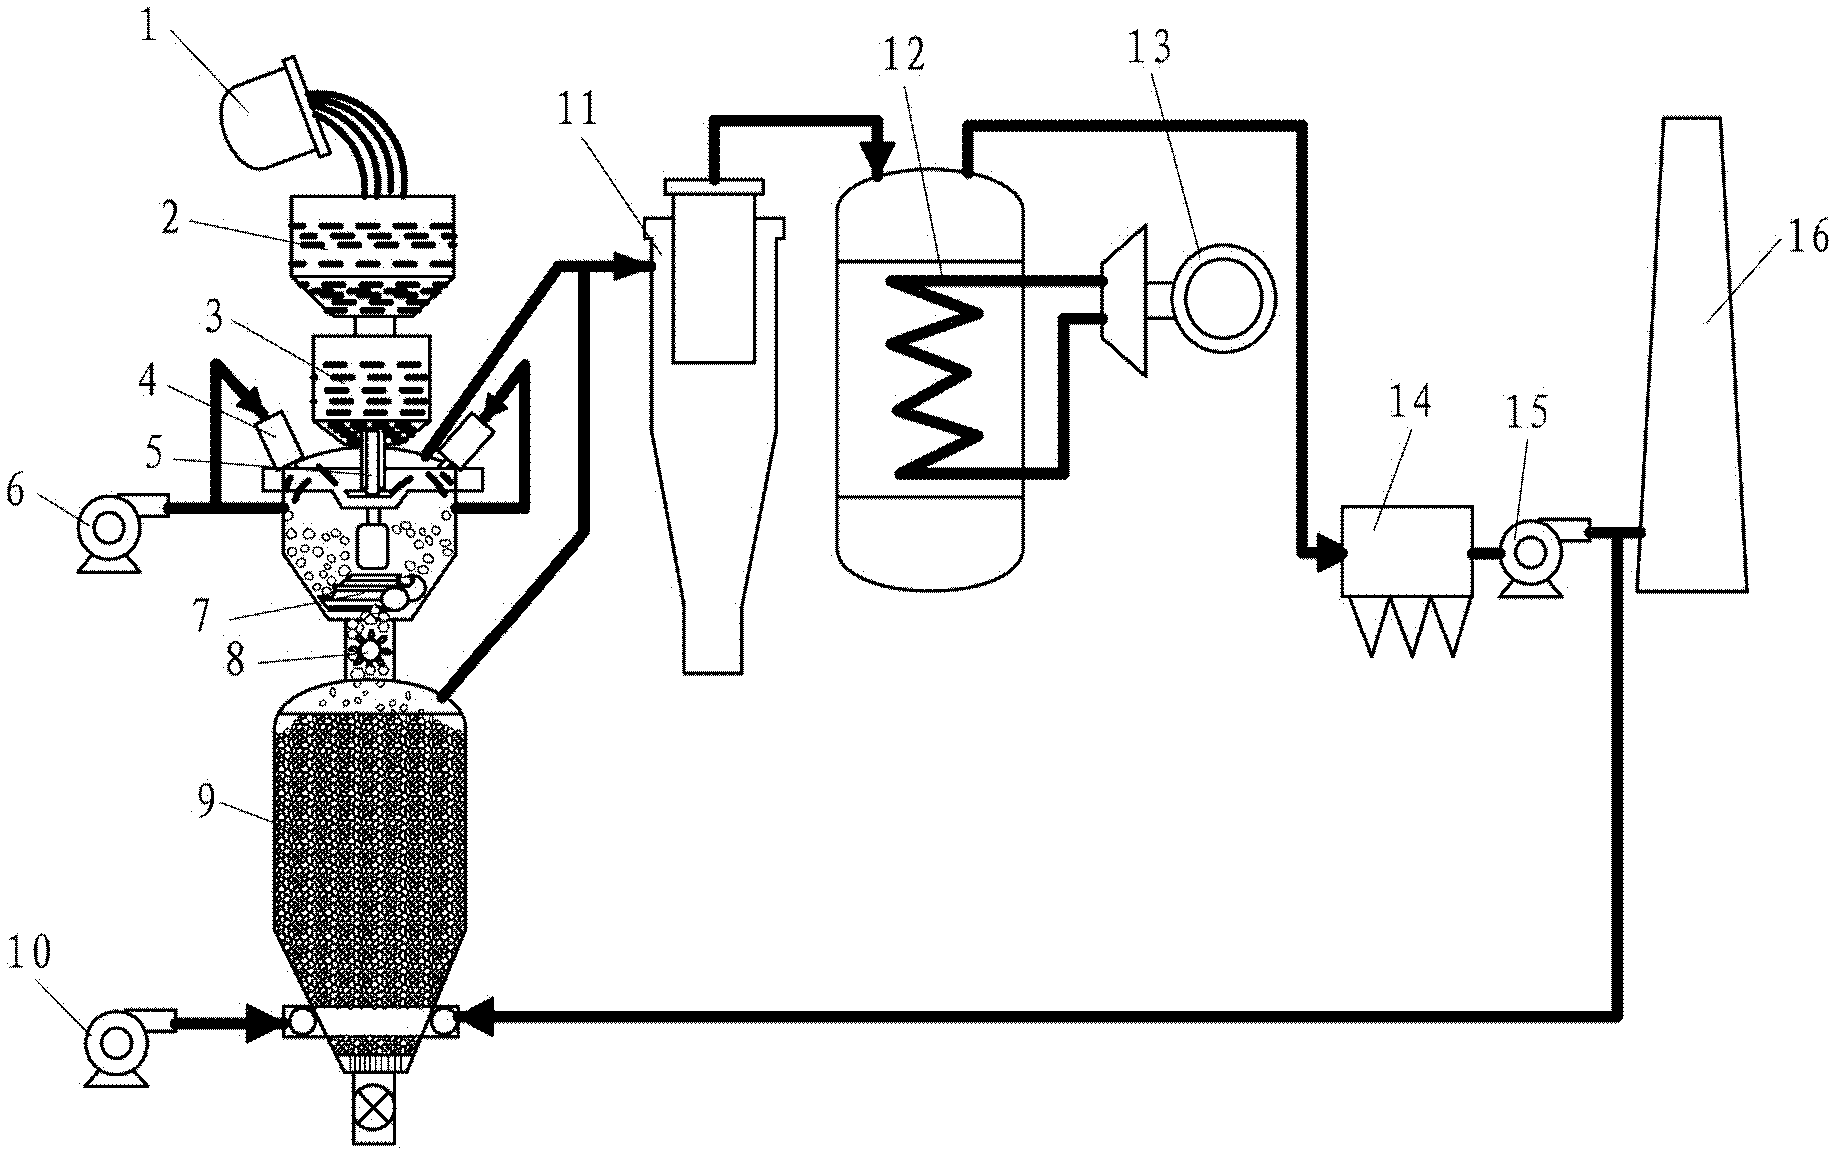 Slag granulating and waste heat recovery device